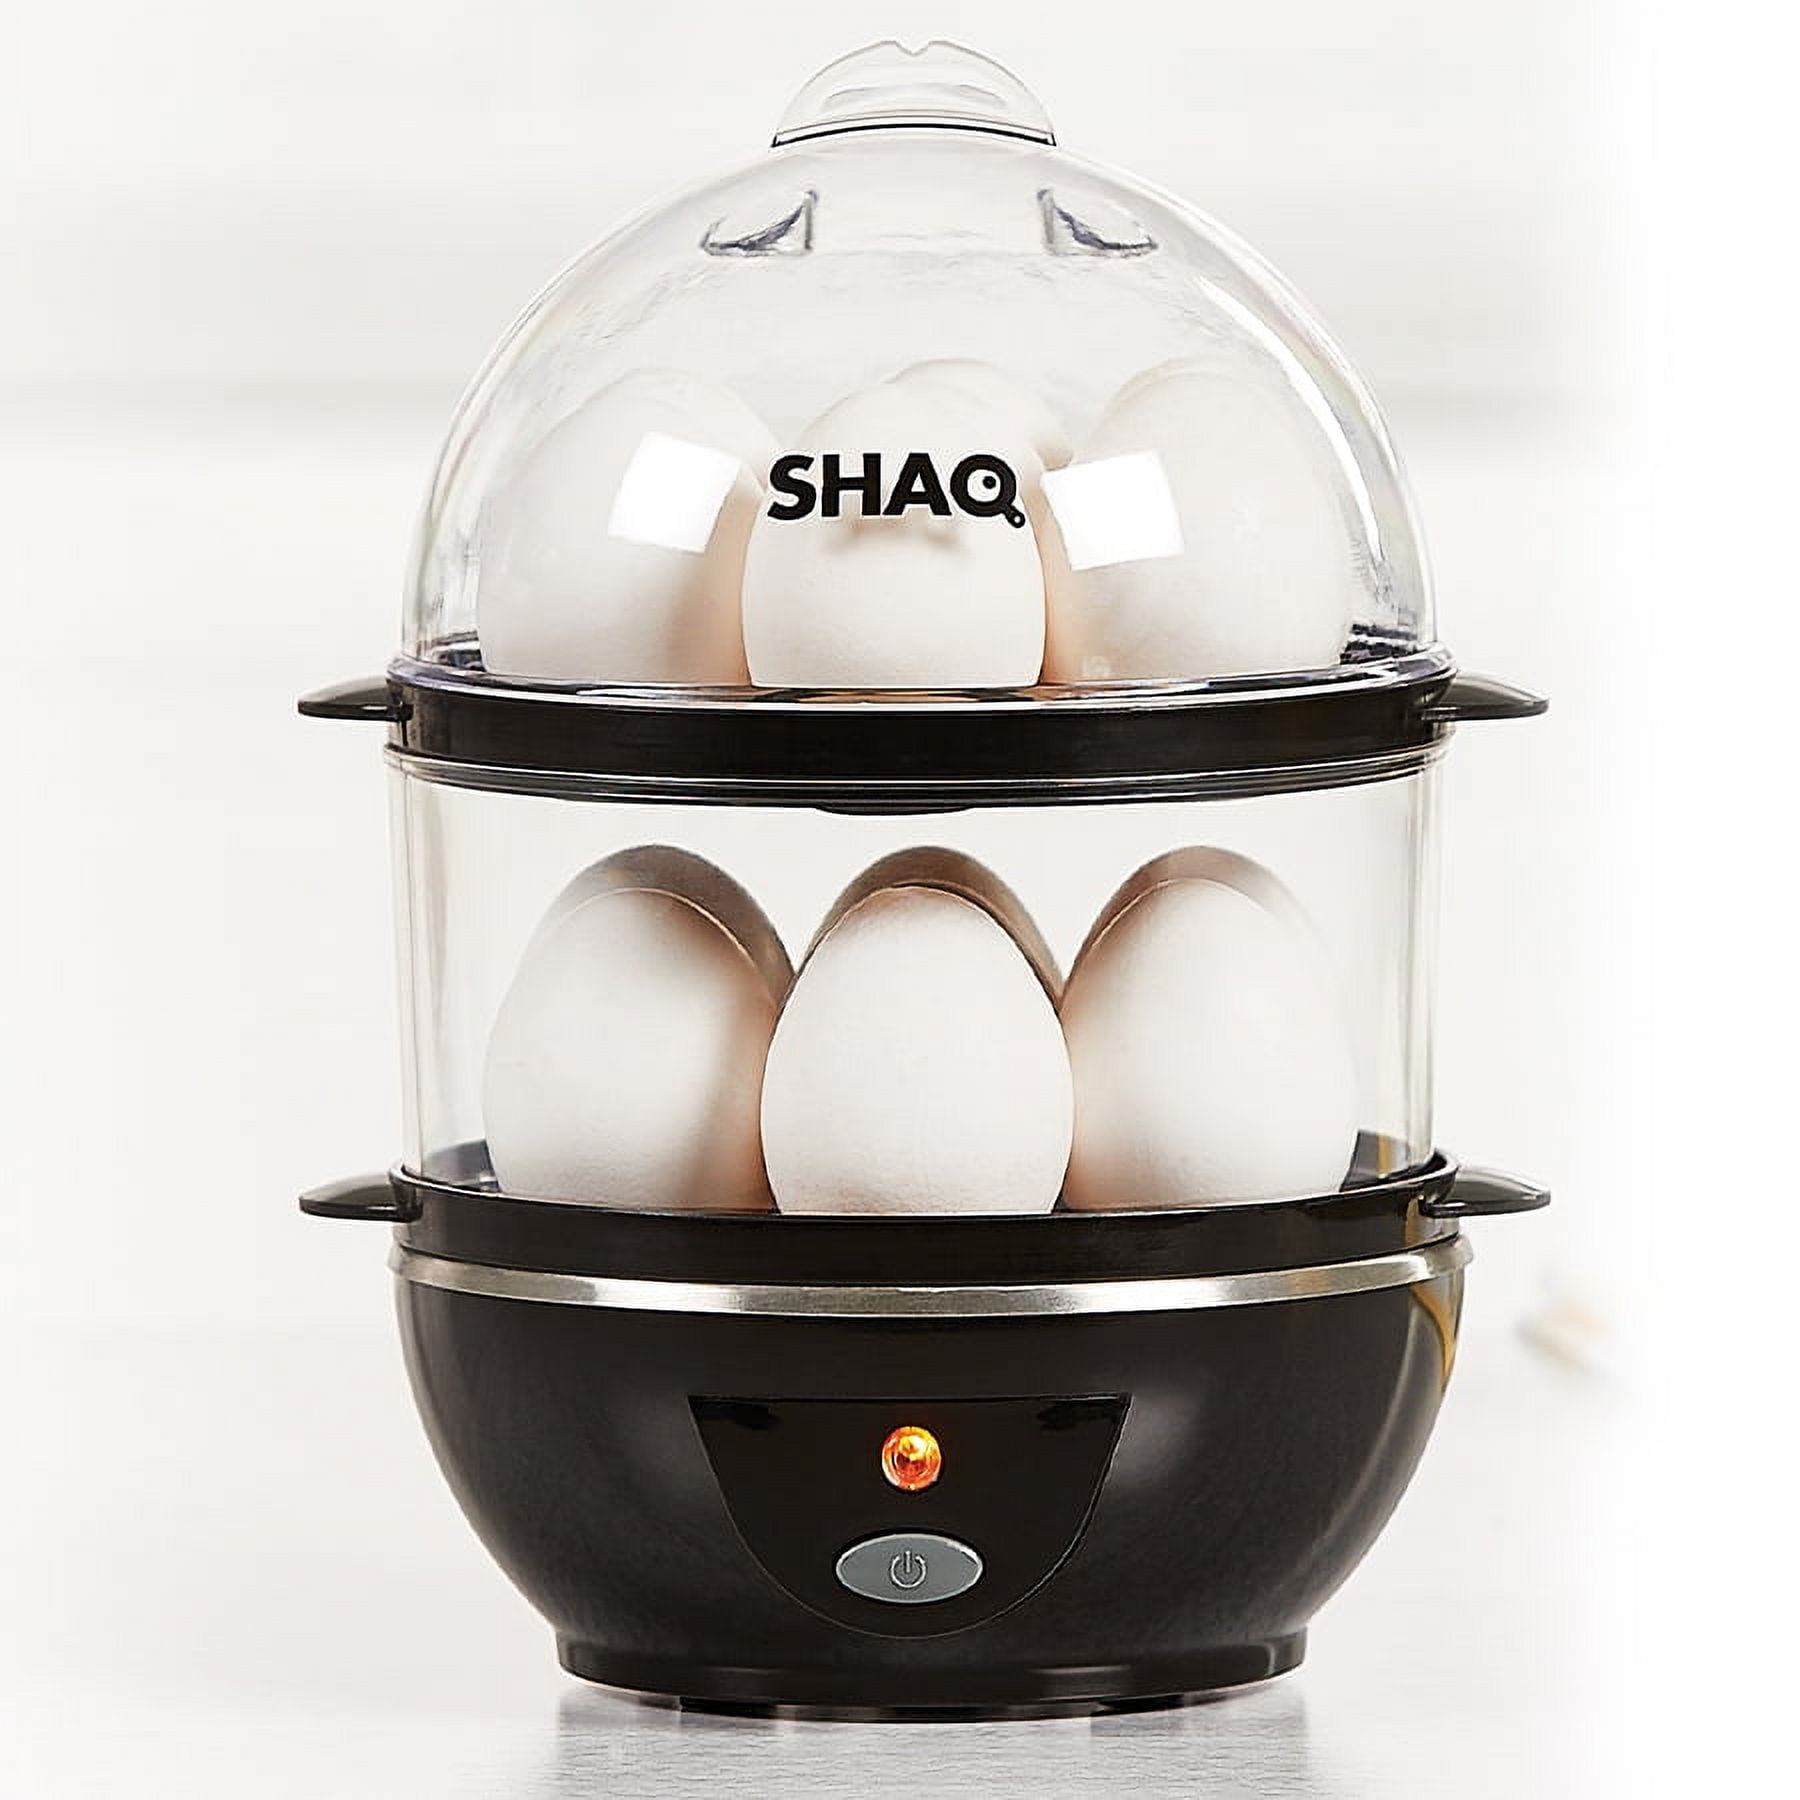 Oavqhlg3b Eggs Cooker: Electric, 14 Capacity for Hard Boiled, Poached, Scrambled, Omelets,, Pink